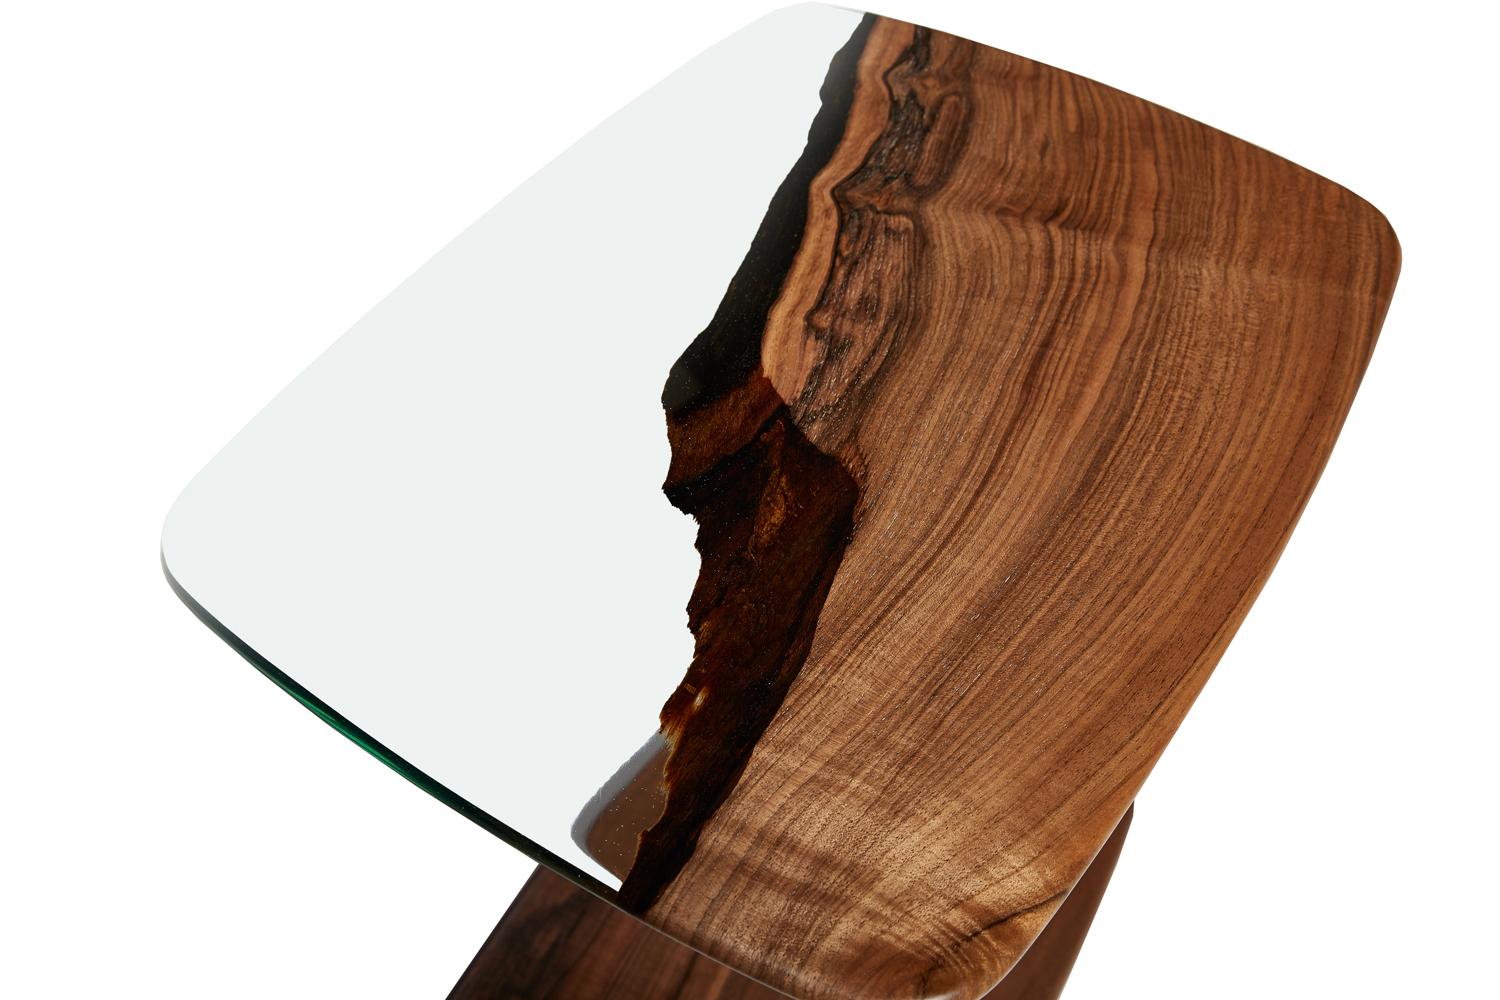 Walnut and resin easy glide end and coffee table by Naturalist.

This clear epoxy resin c-table is made with walnut wood. The creamy tones of the wood add a perfect biophilic feel to any space, while our exclusive ultra clear resin adds its modern